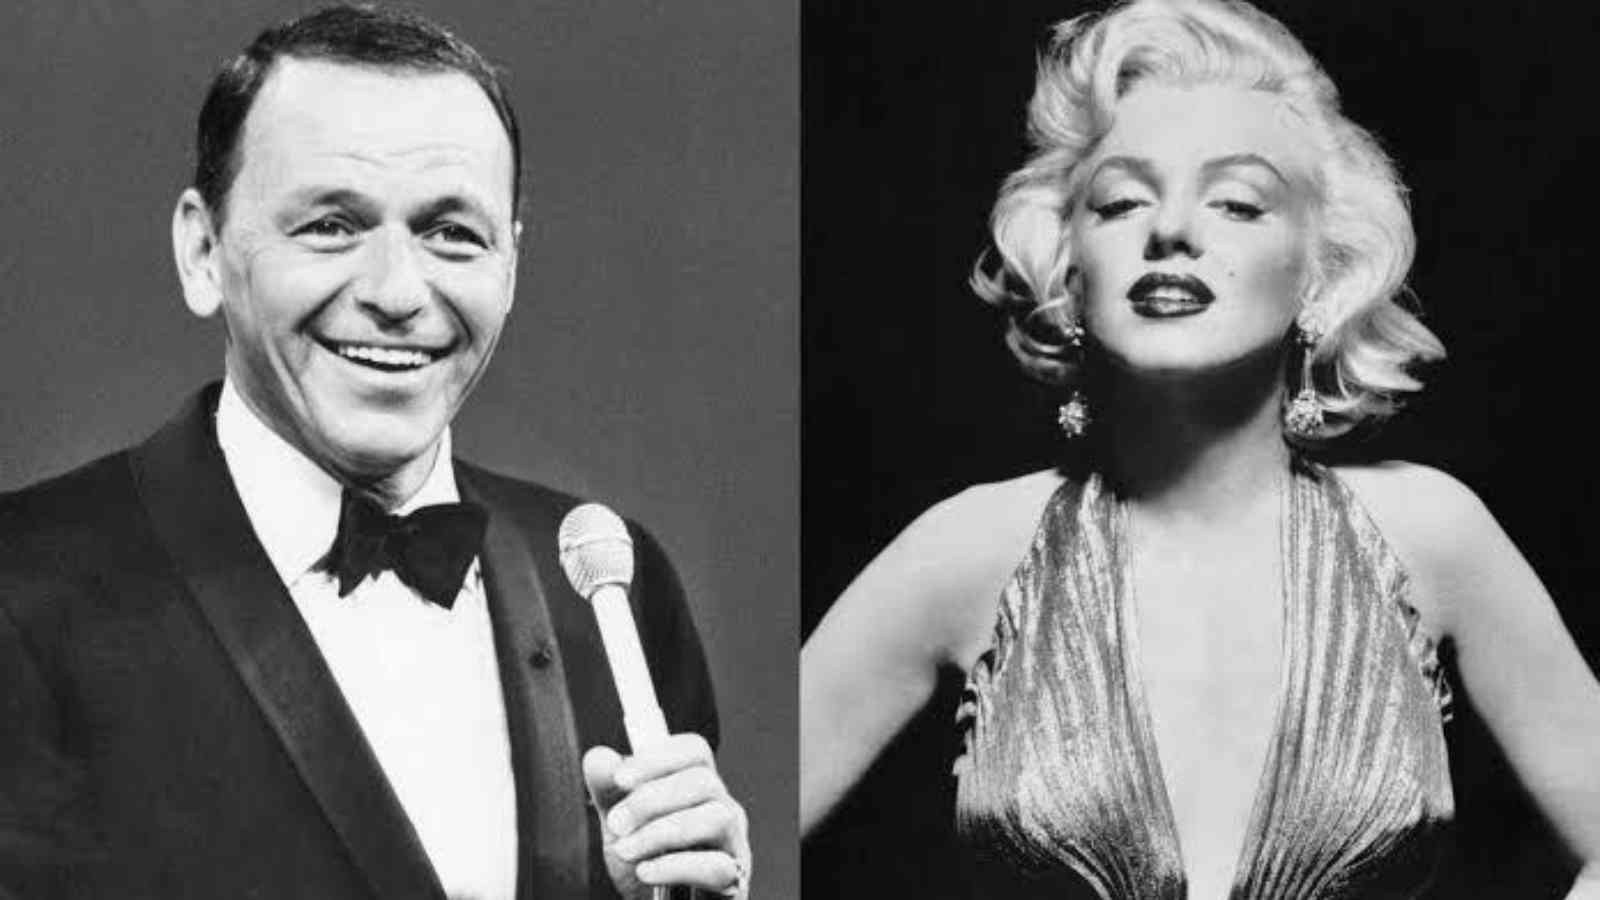 Frank Sinatra briefly lived with Marilyn Monroe in Los Angeles